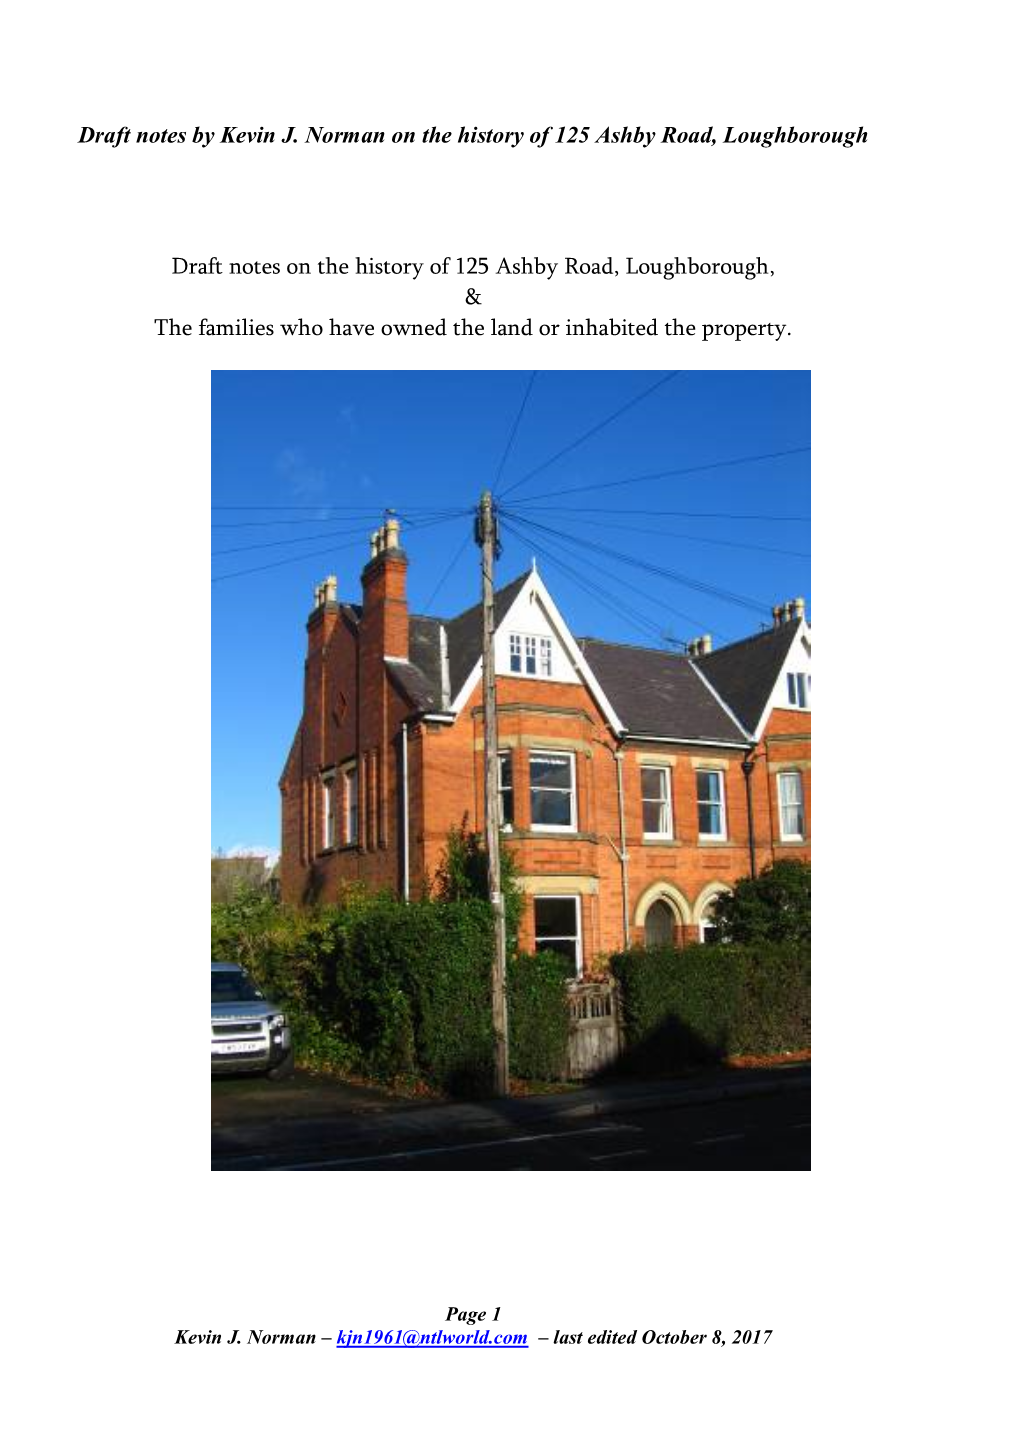 History of Our House in Ashby Road, Loughborough